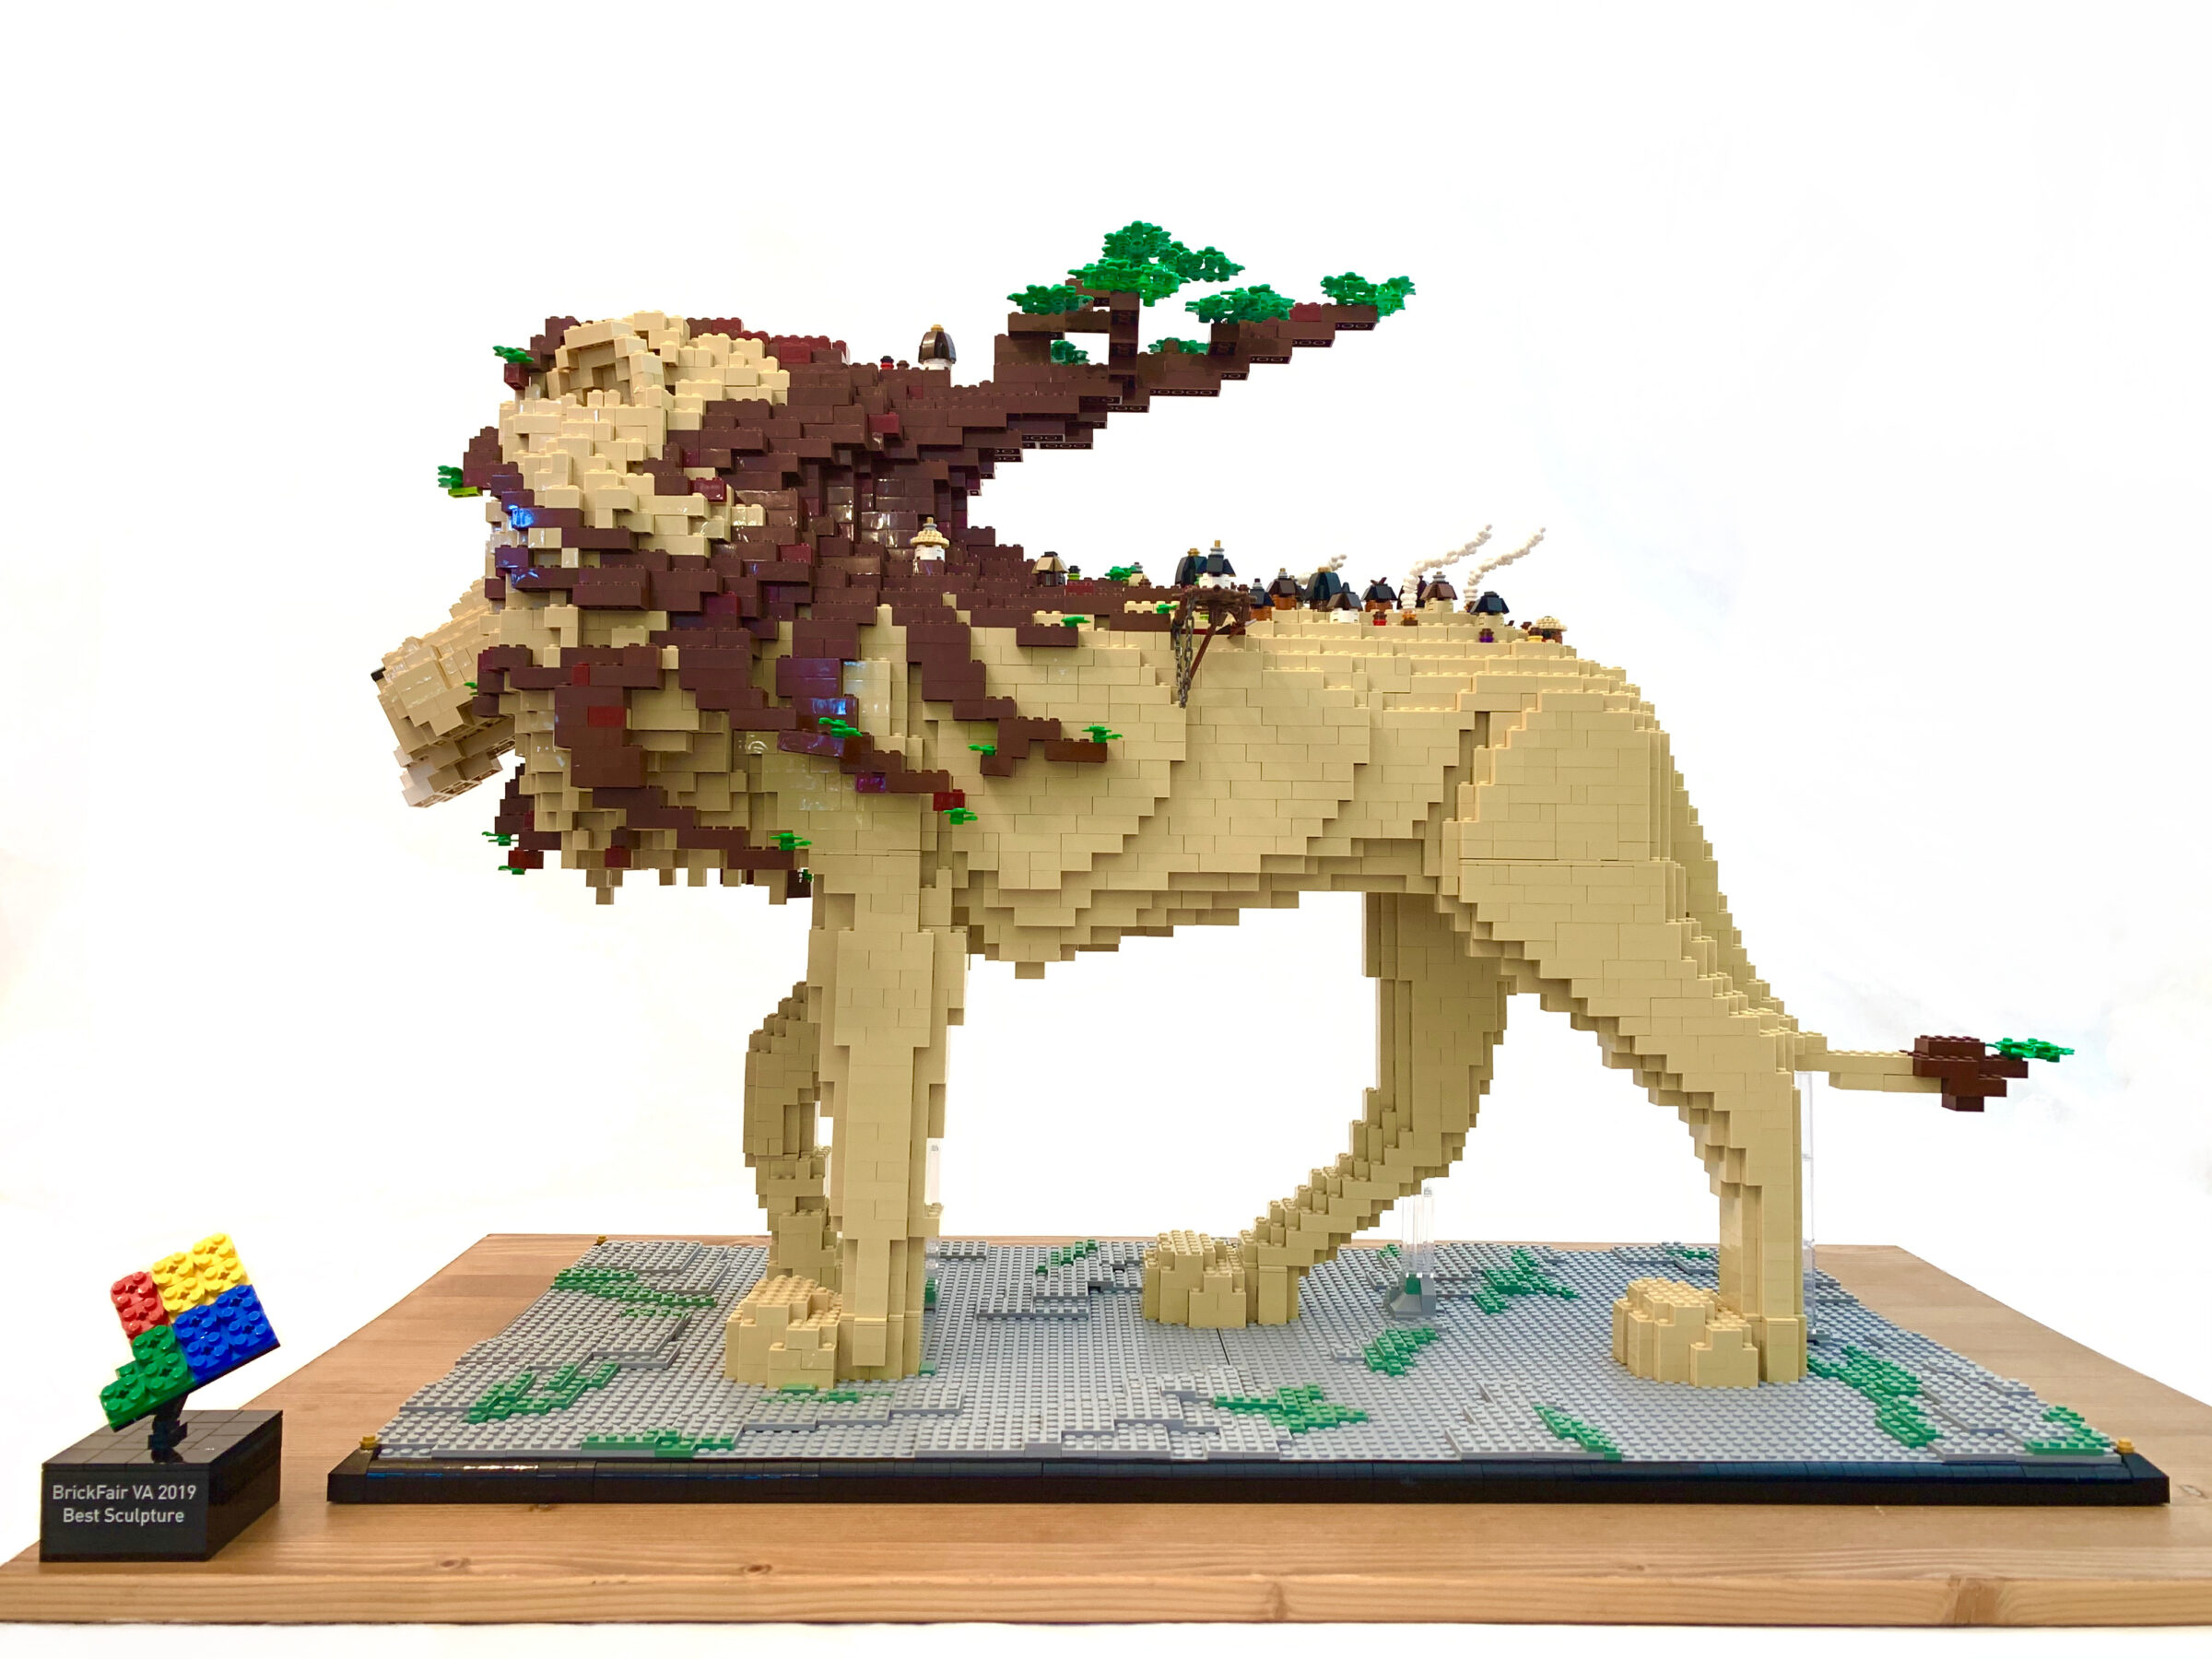 Photograph of a LEGO statue